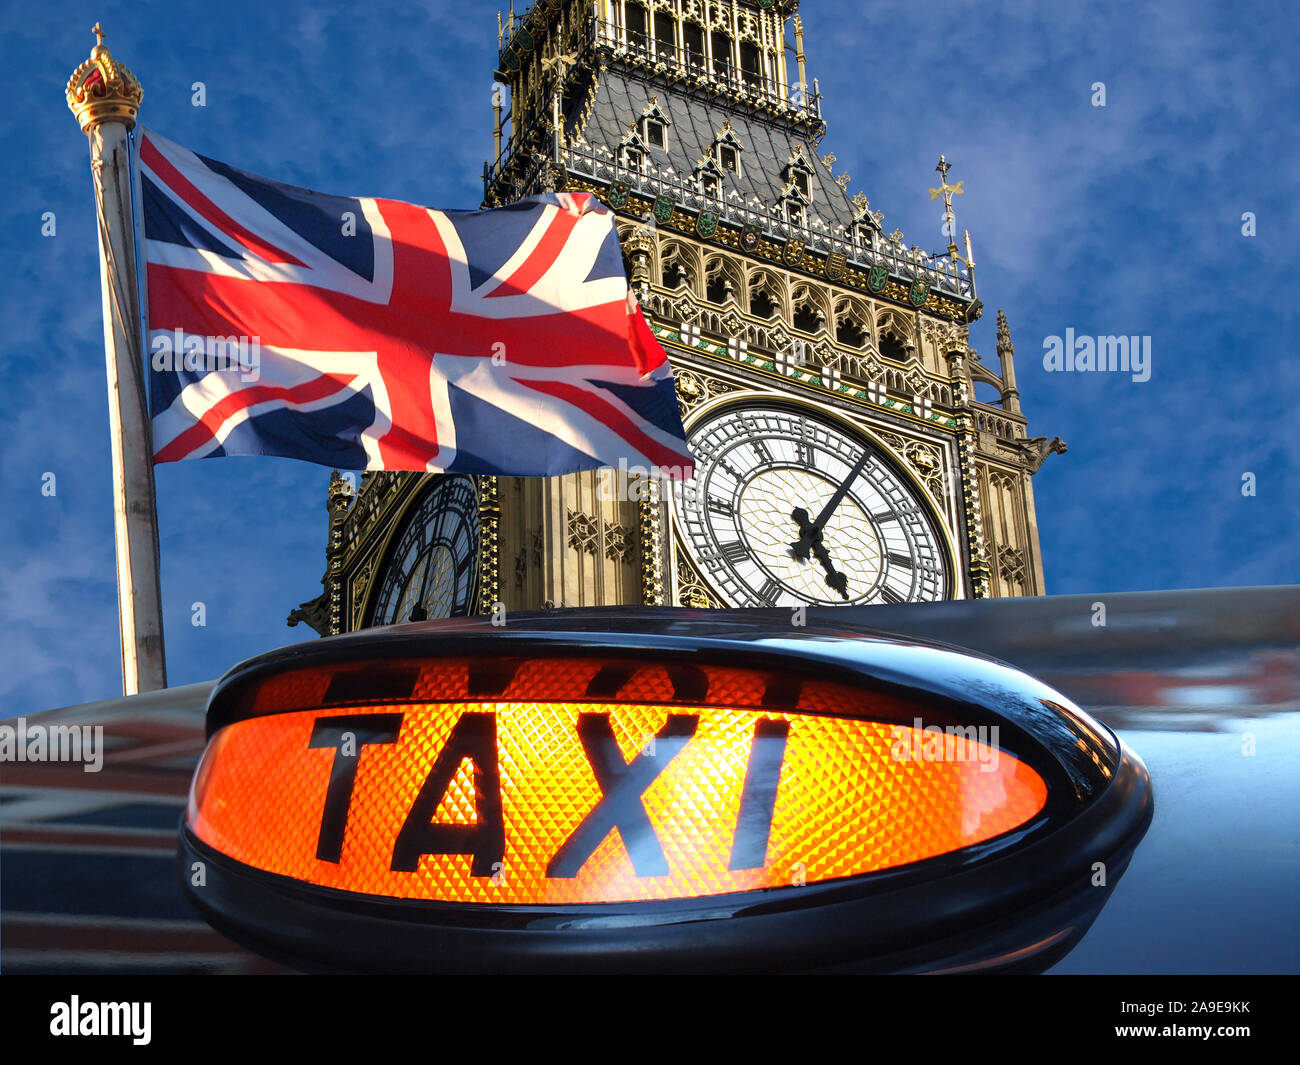 Union jack flagon pole , Big Ben and sign for taxi Stock Photo